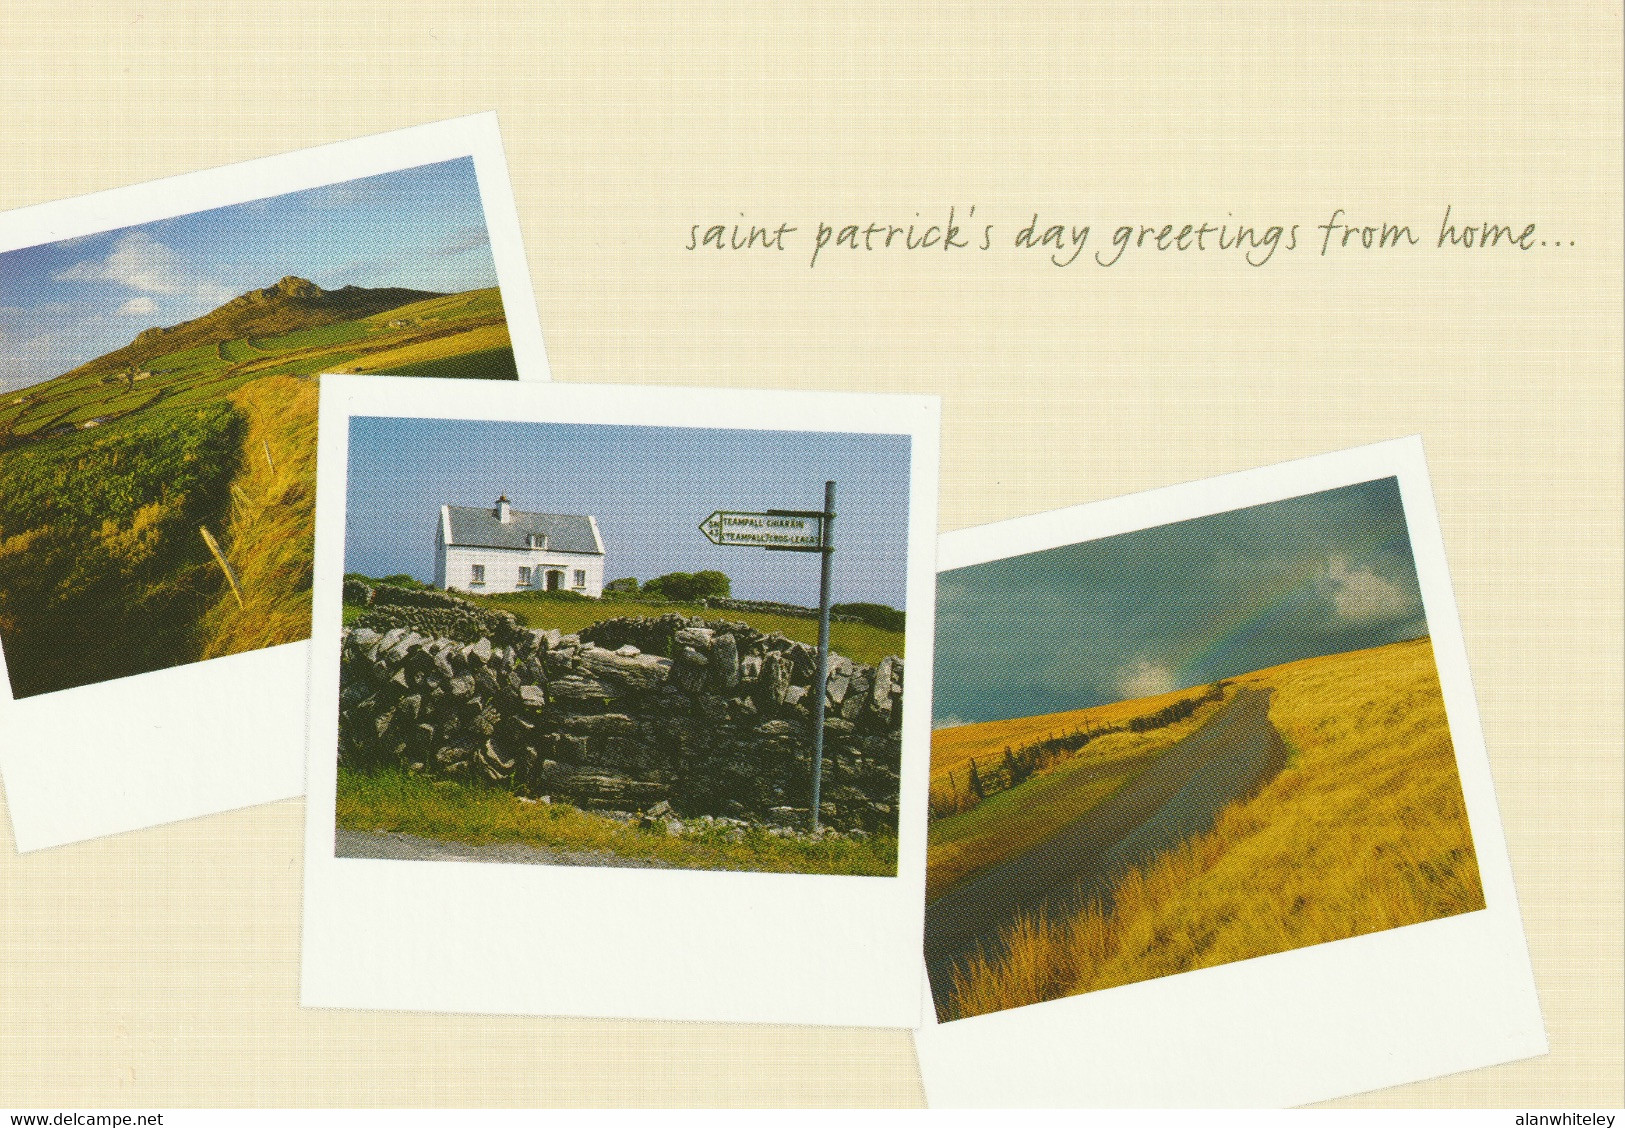 IRELAND 2003 St Patrick's Day: Set Of 3 Greeting Cards With Pre-Paid Envelopes MINT/UNUSED - Entiers Postaux